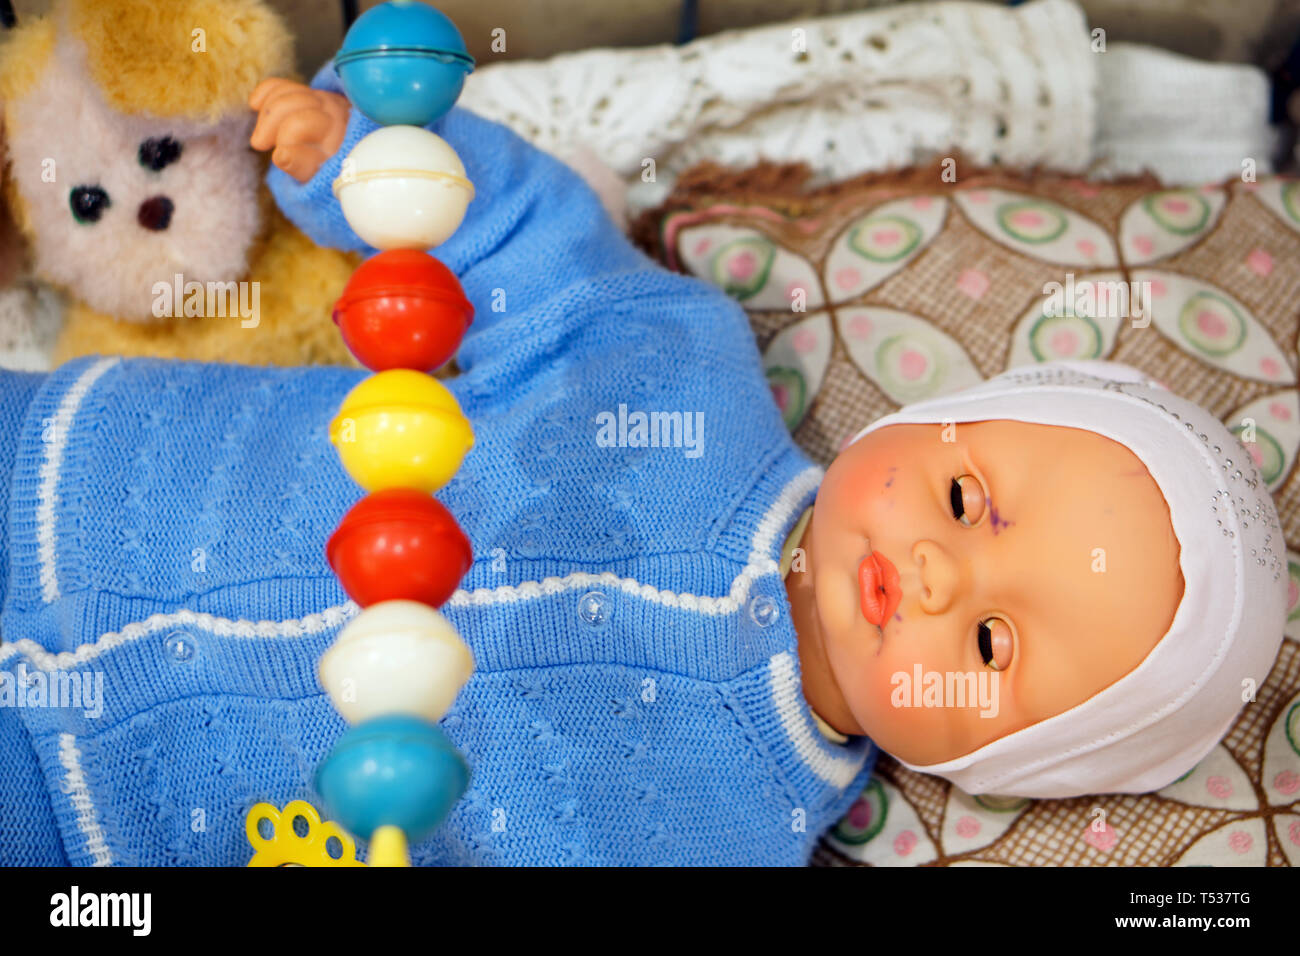 Old toy, vintage doll - baby in a blue sweater in a crib with a dog. Subject from the past. Stock Photo